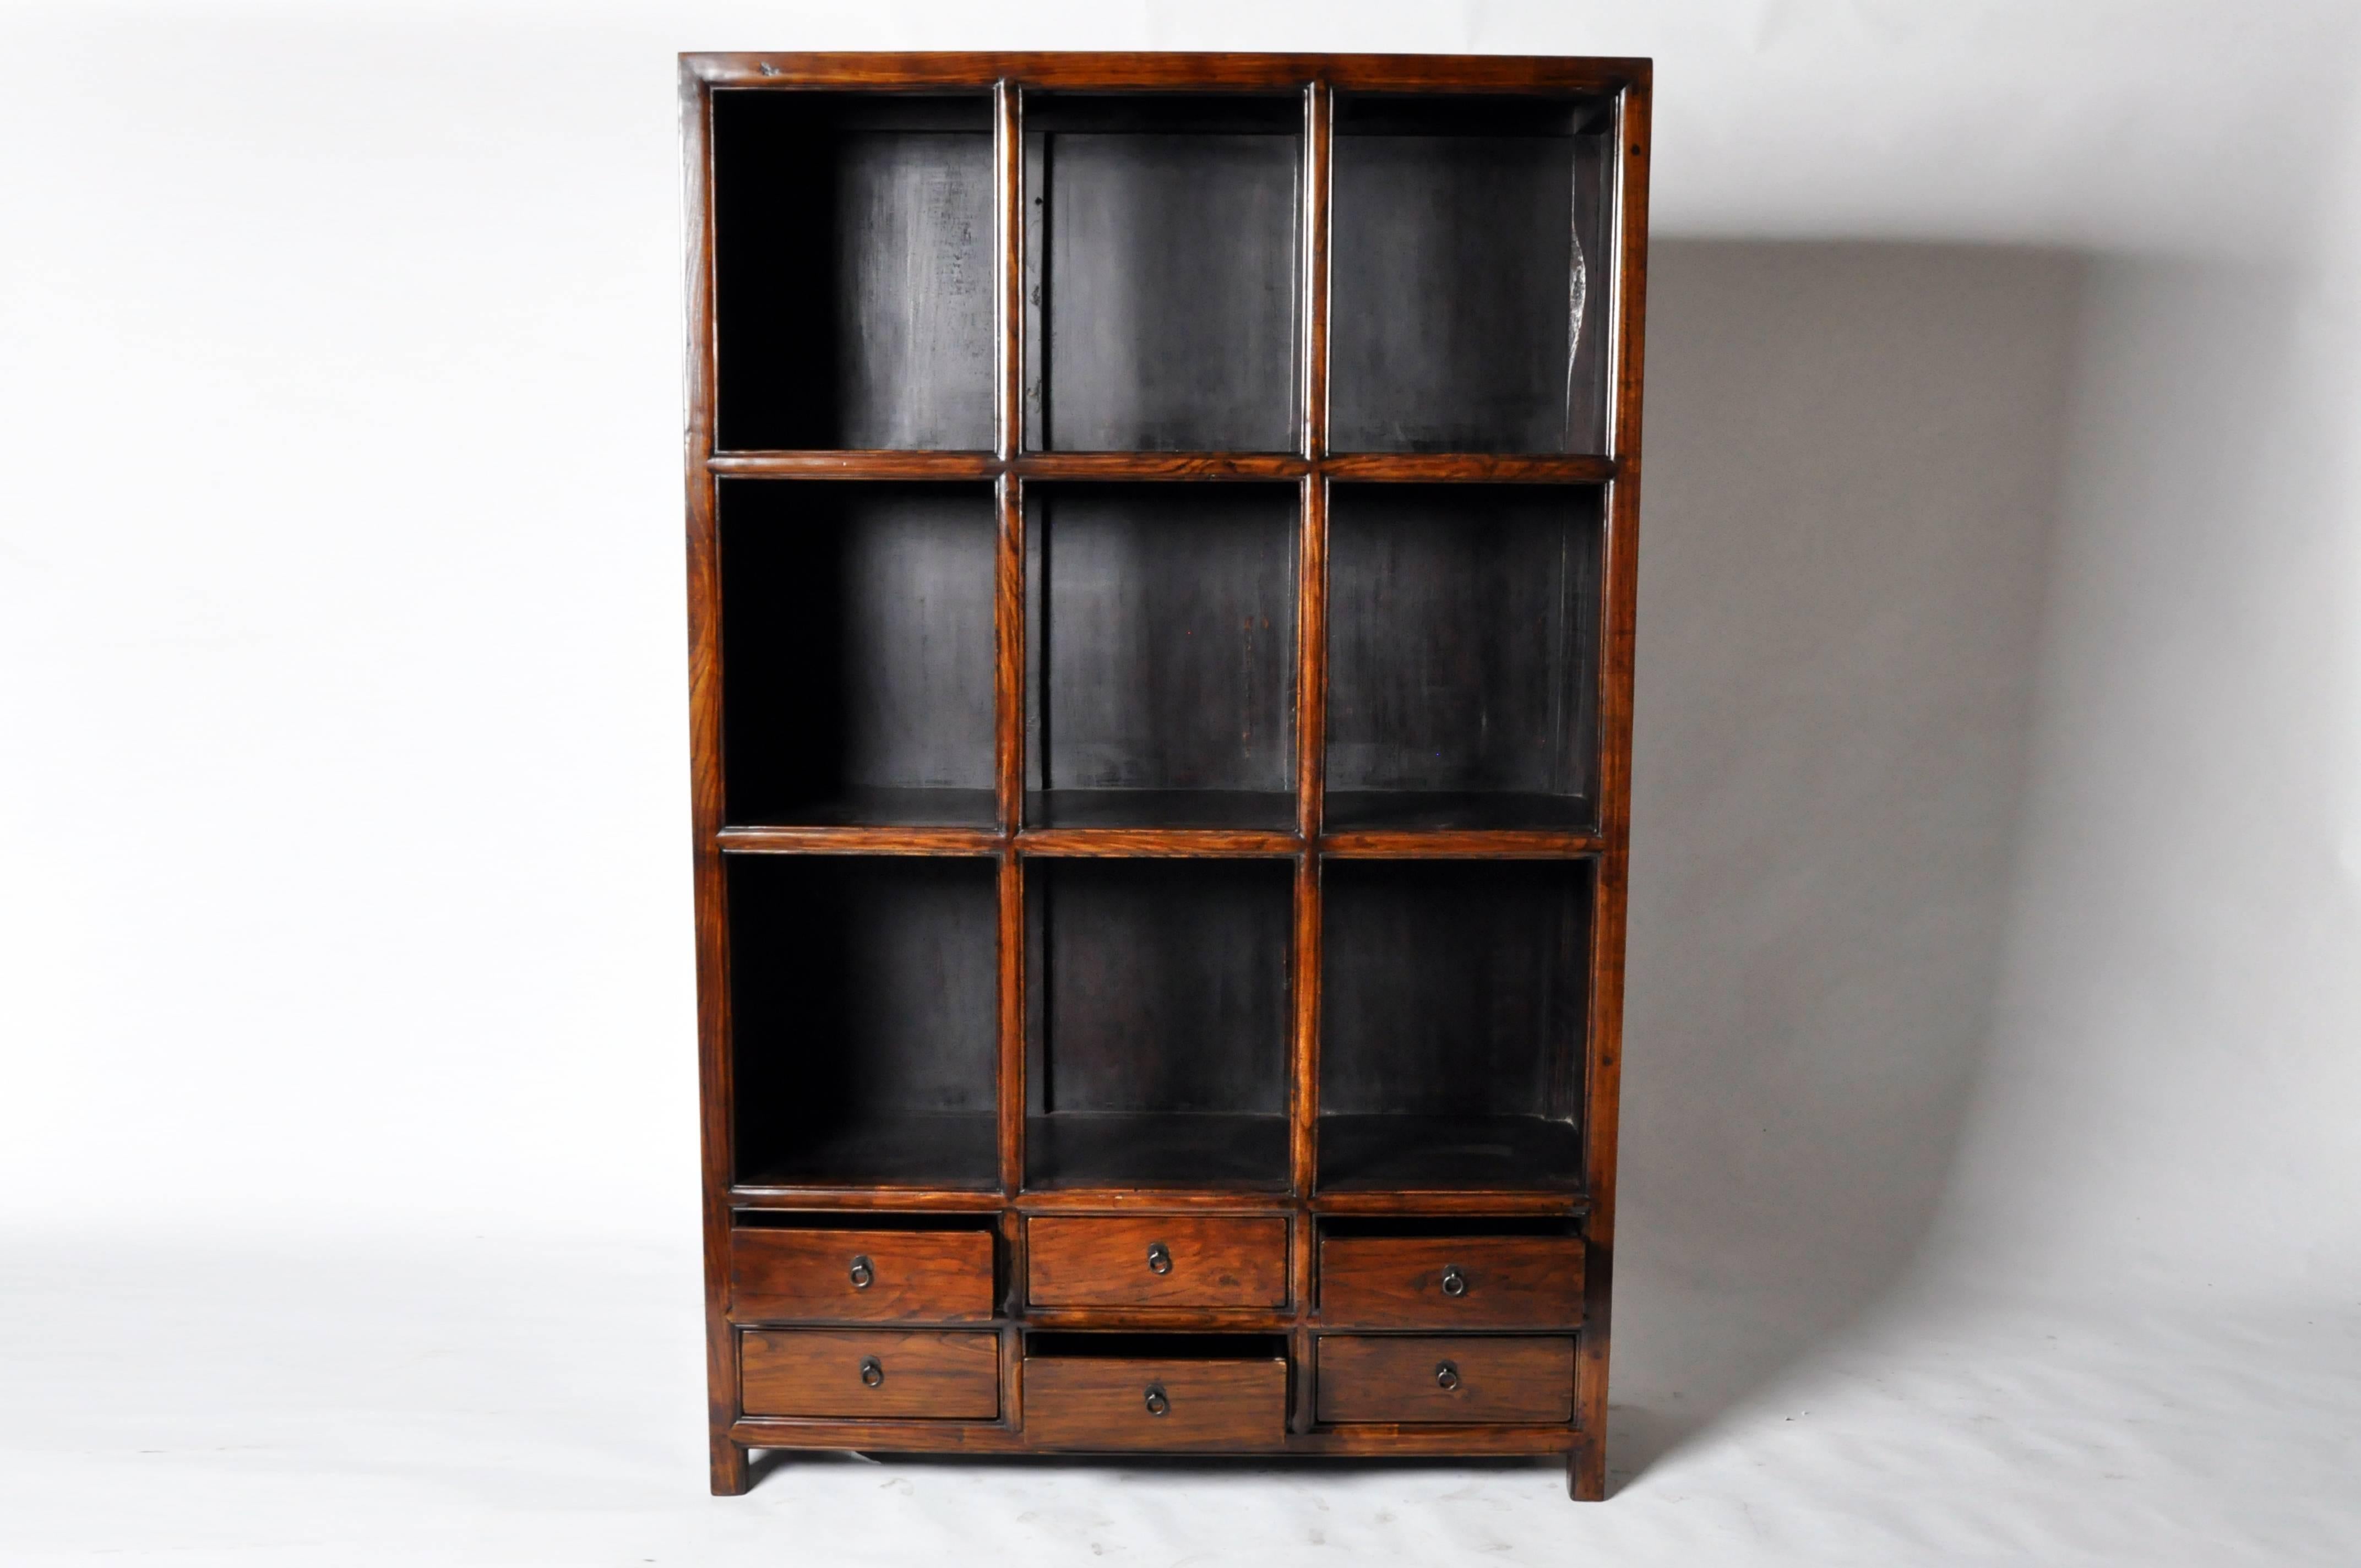 This impressive Chinese display cabinet is made from elmwood with some restoration. It features ample display shelves and six drawers for storage.